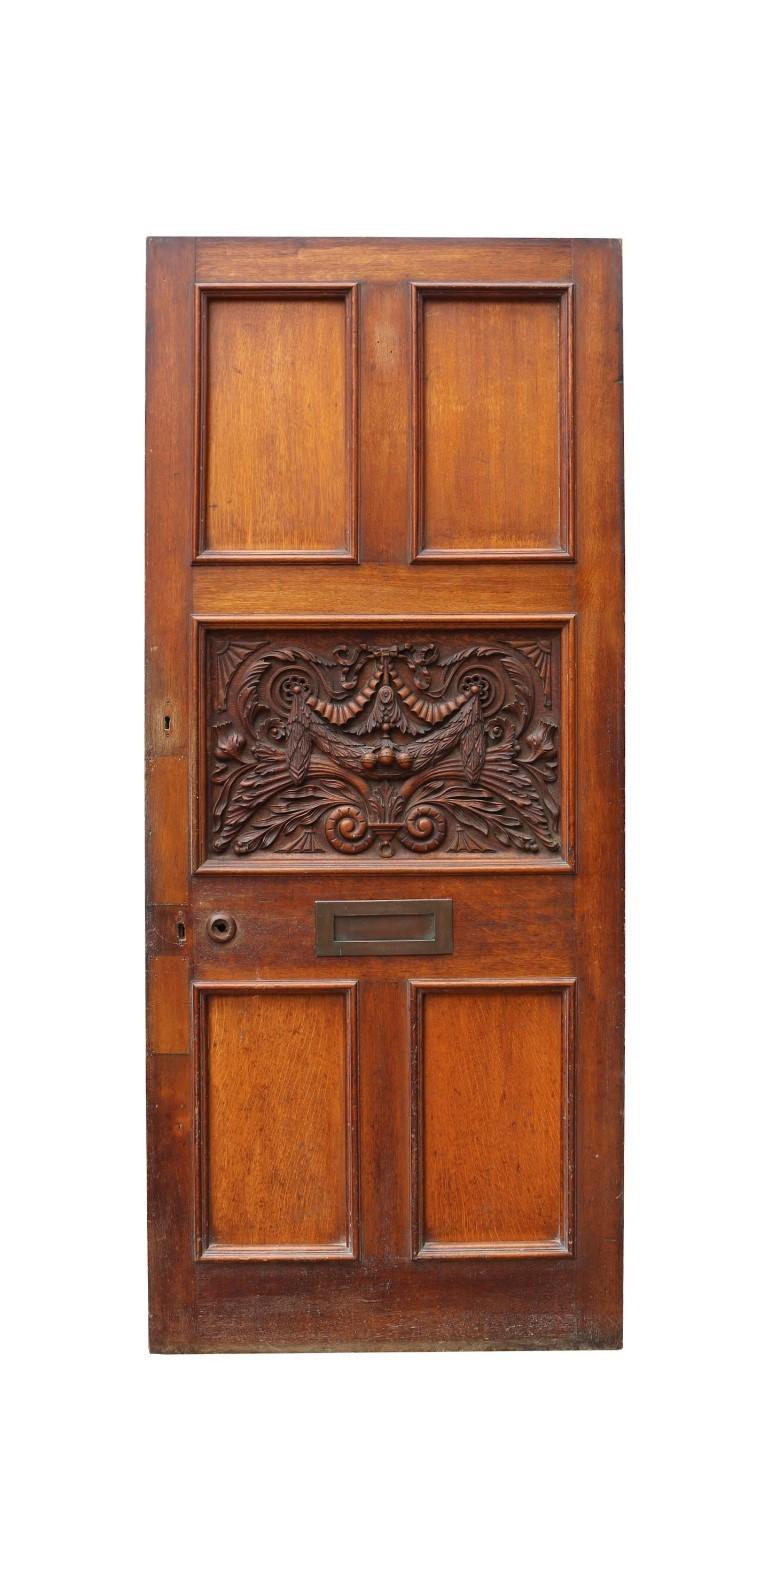 A good quality reclaimed door, the centre panel deeply carved with foliage and swag decoration.